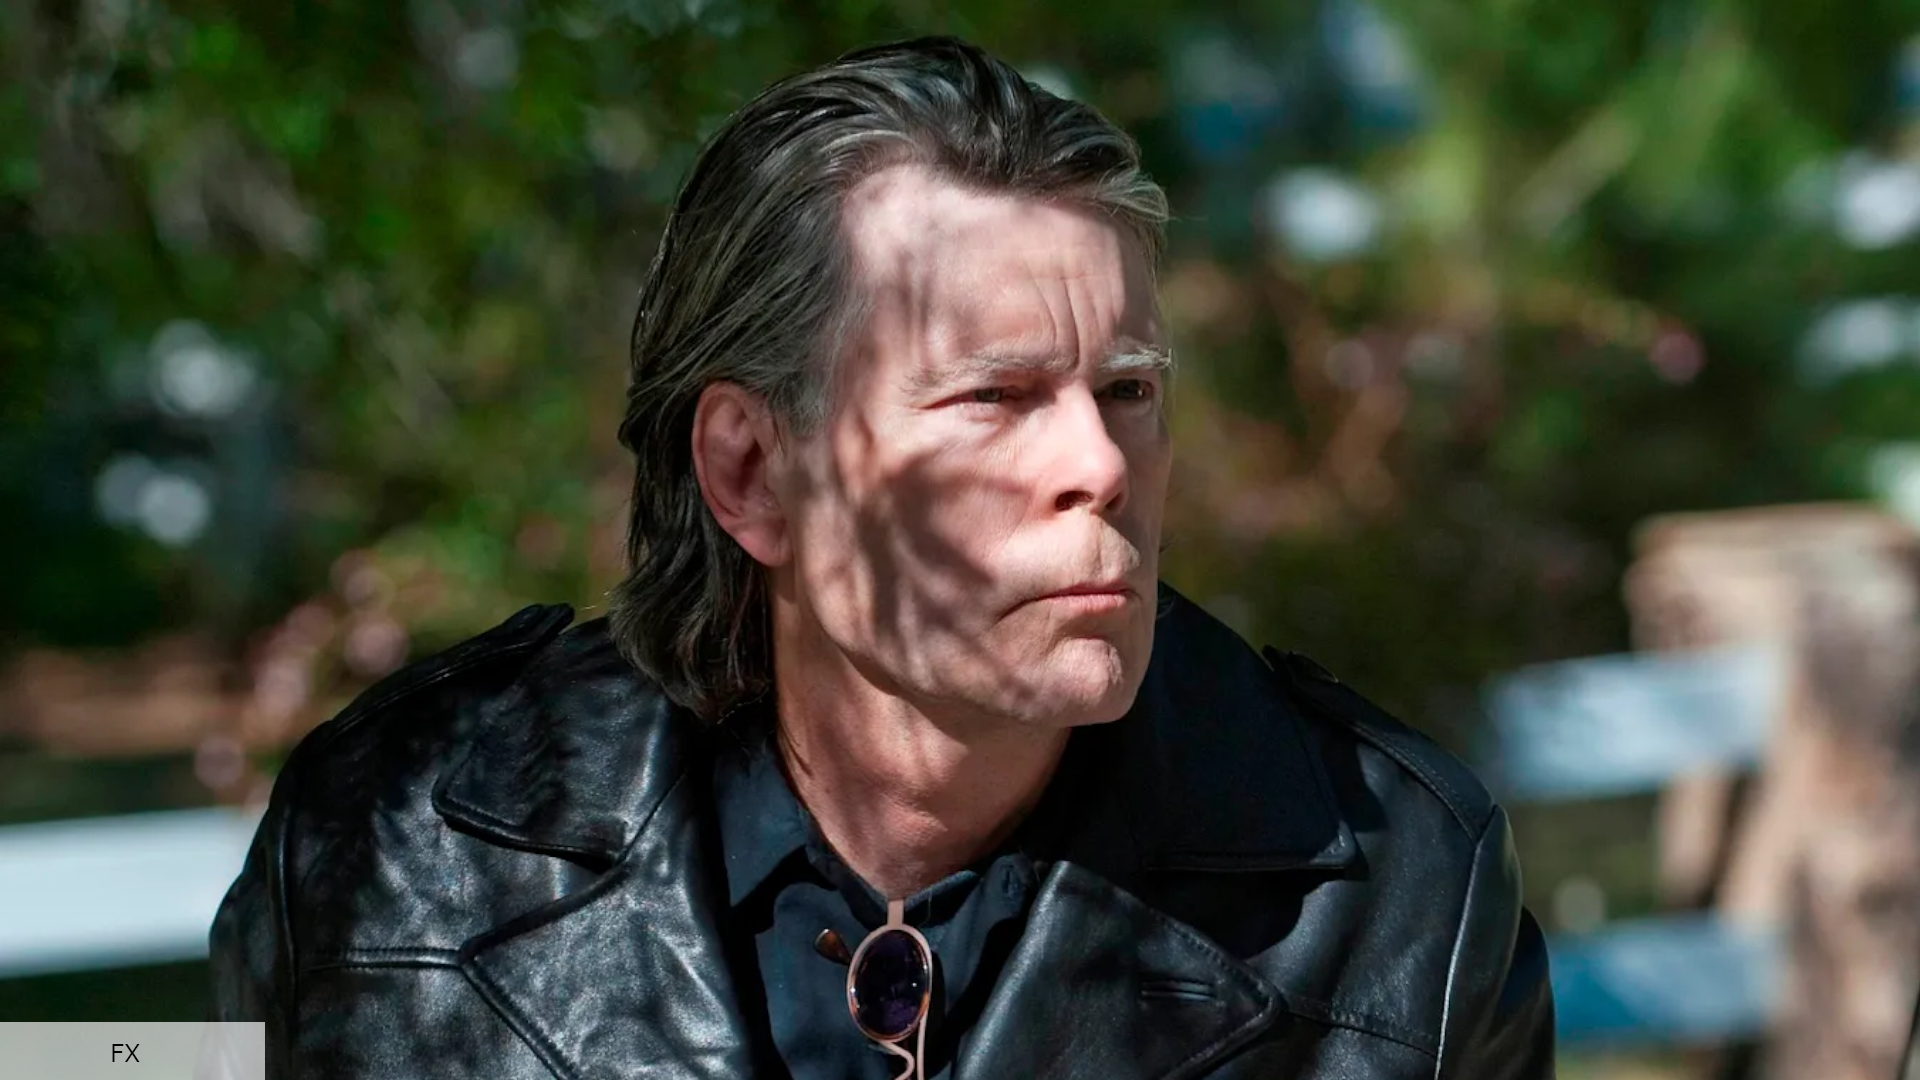 Sons of Anarchy creator promised Stephen King a “nasty” cameo